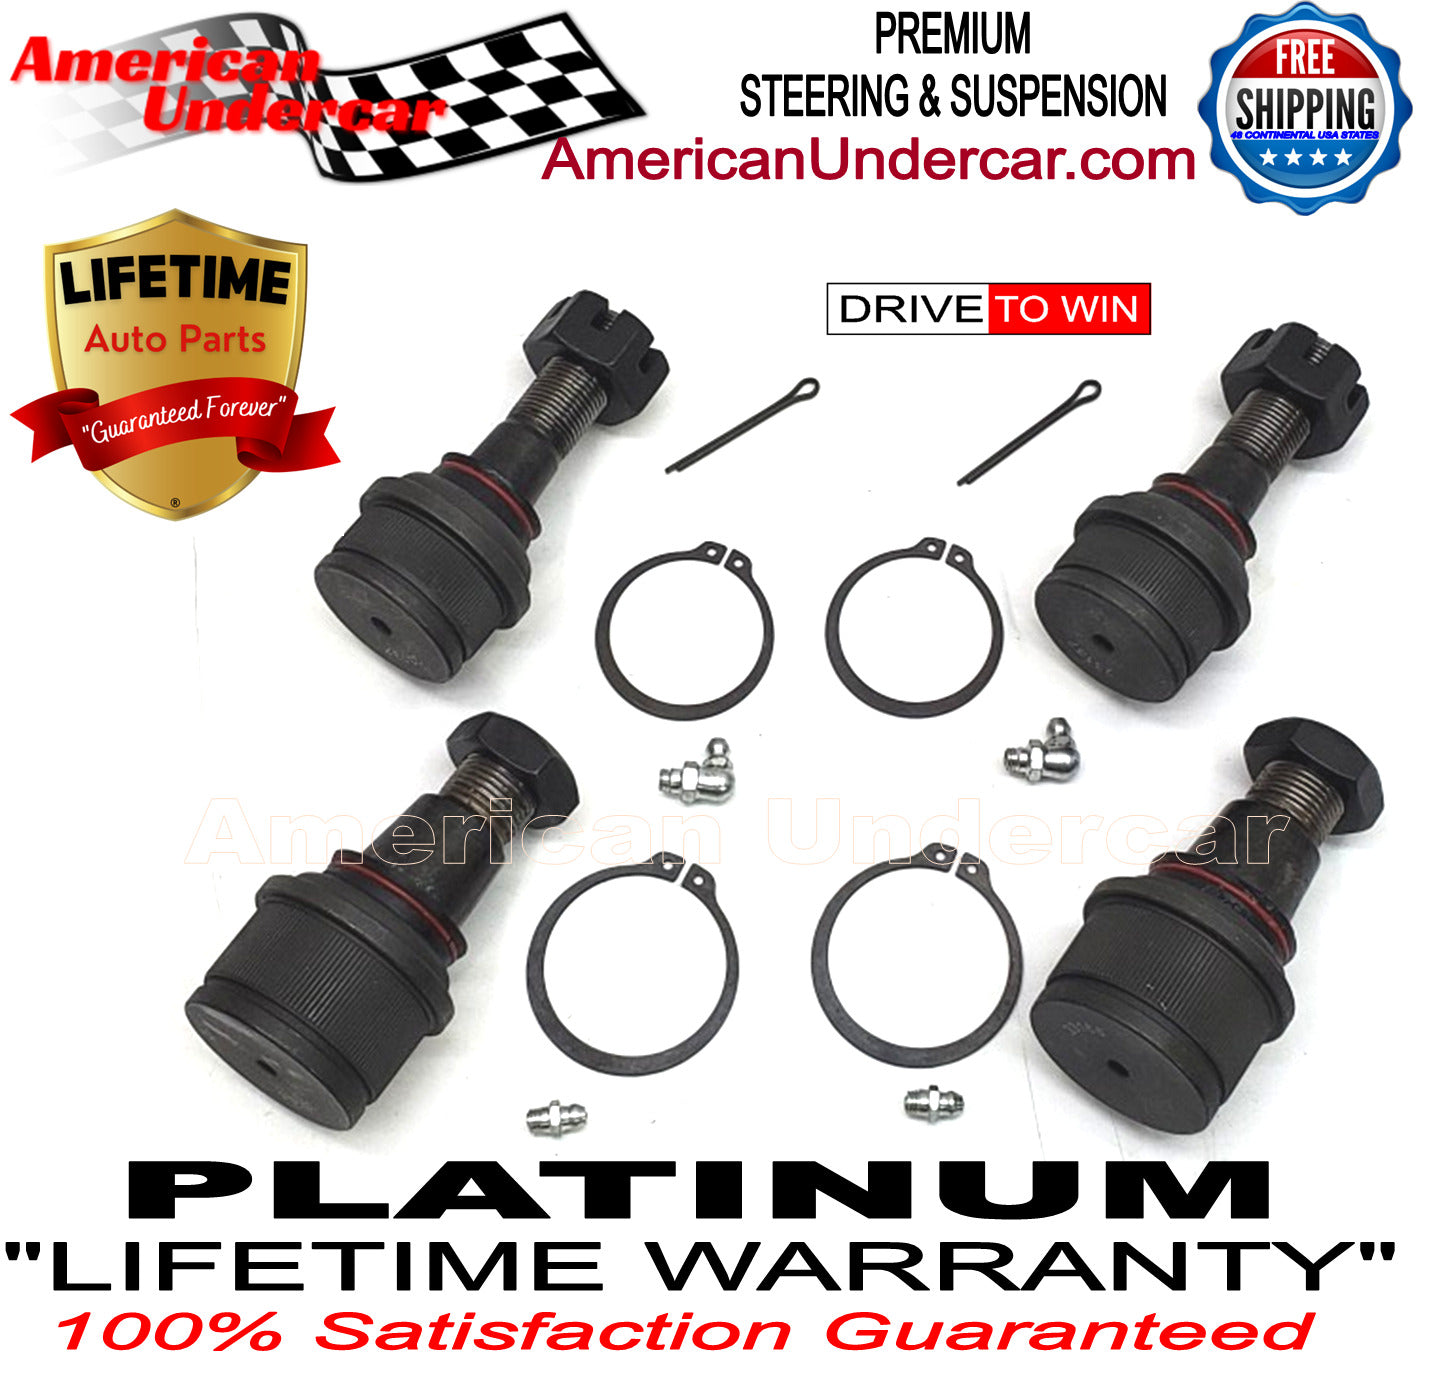 Lifetime Ball Joint Suspension Kit for 1999-2004 Ford F450 Super Duty 4x4